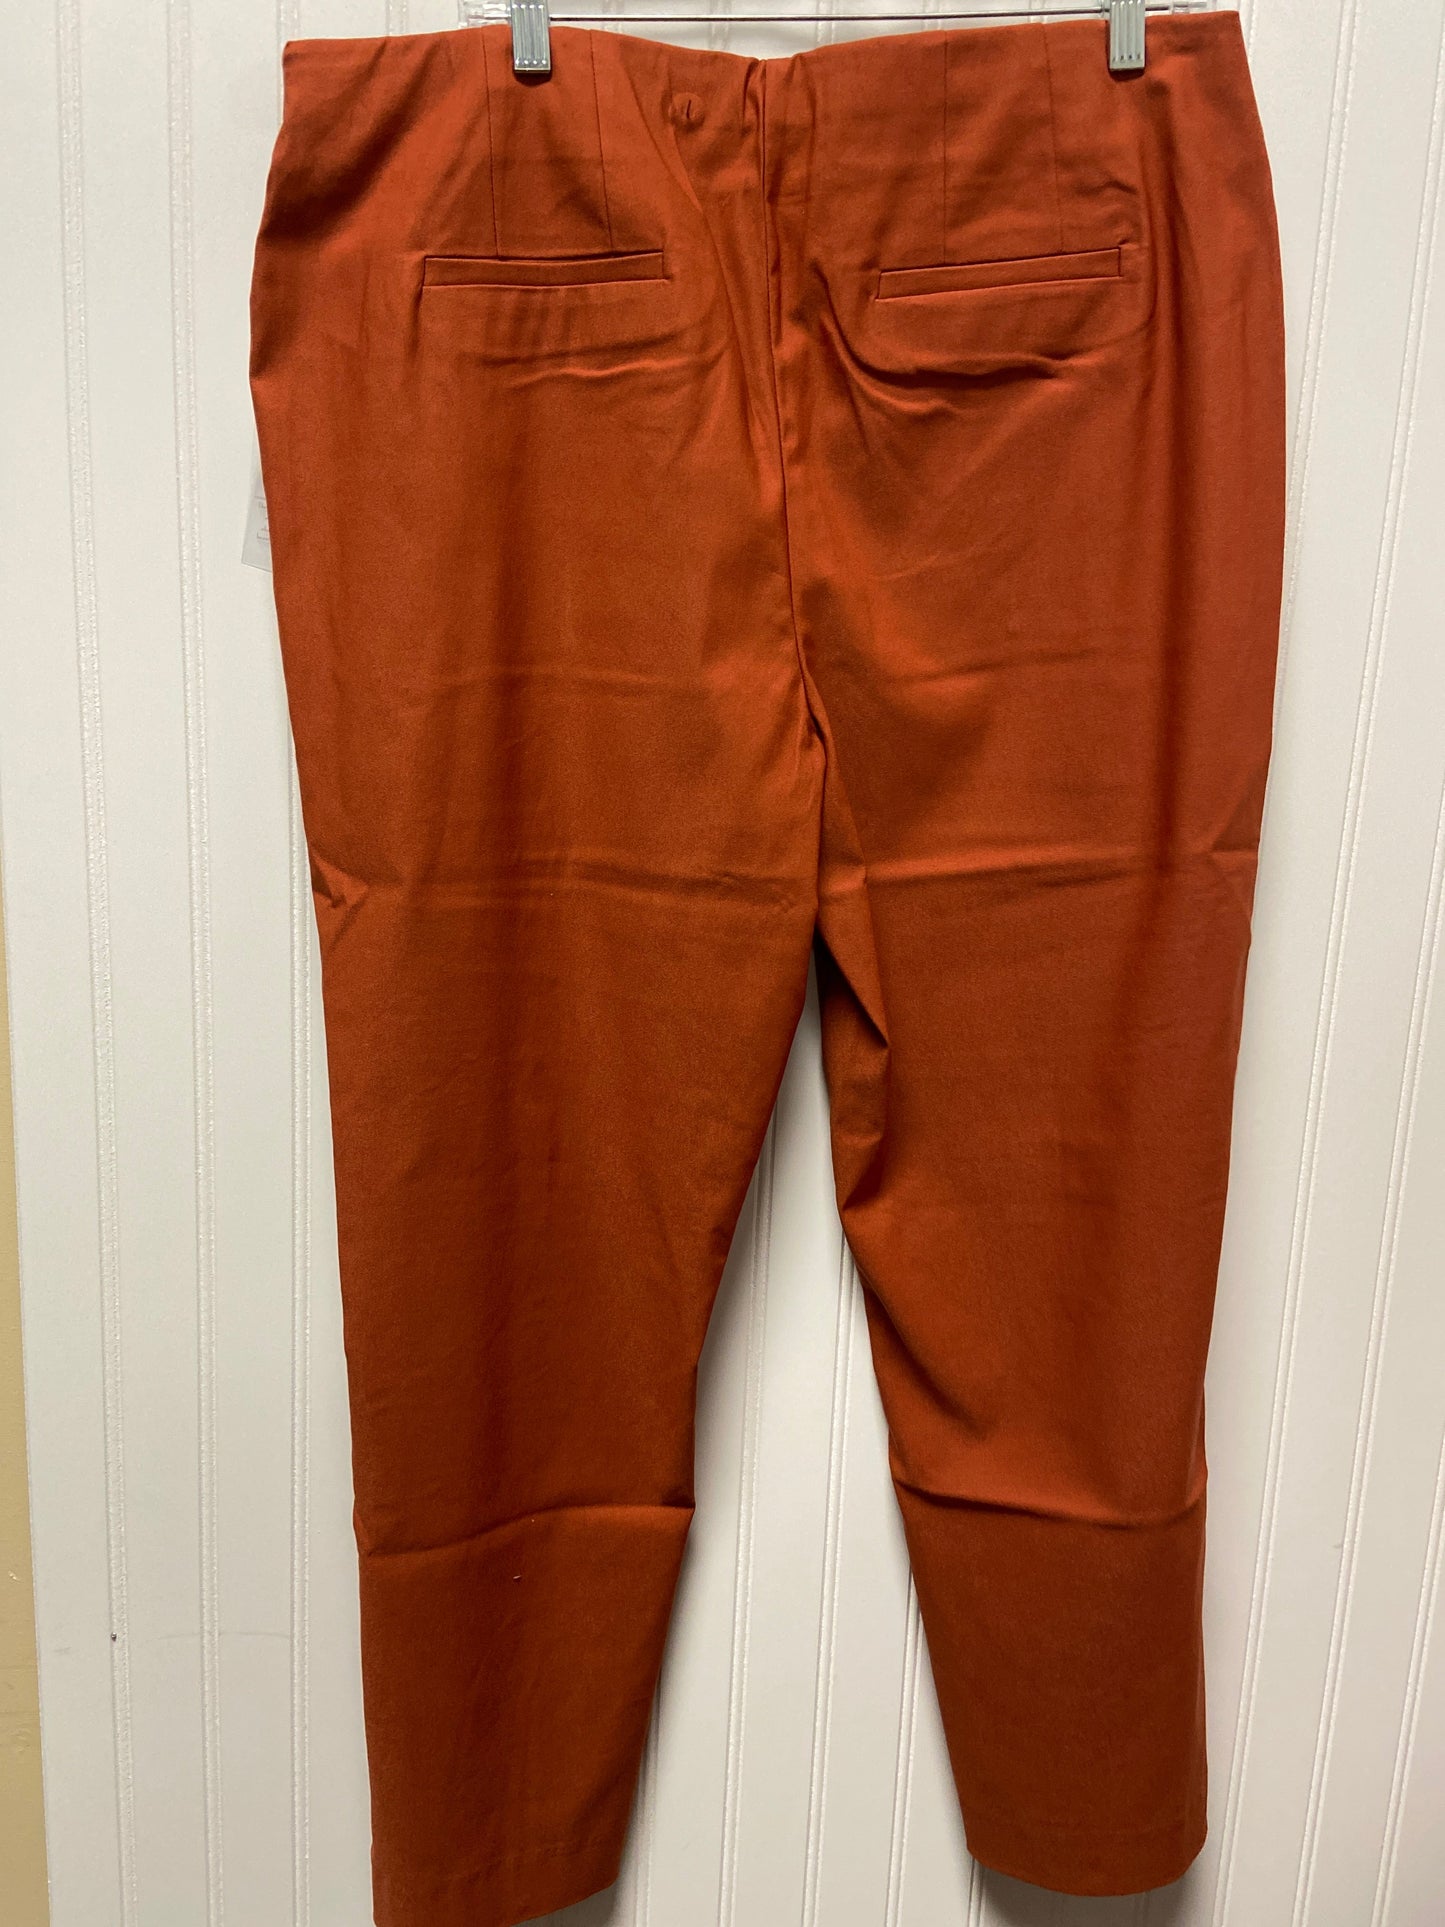 Pants Ankle By Nanette Lepore  Size: 1x